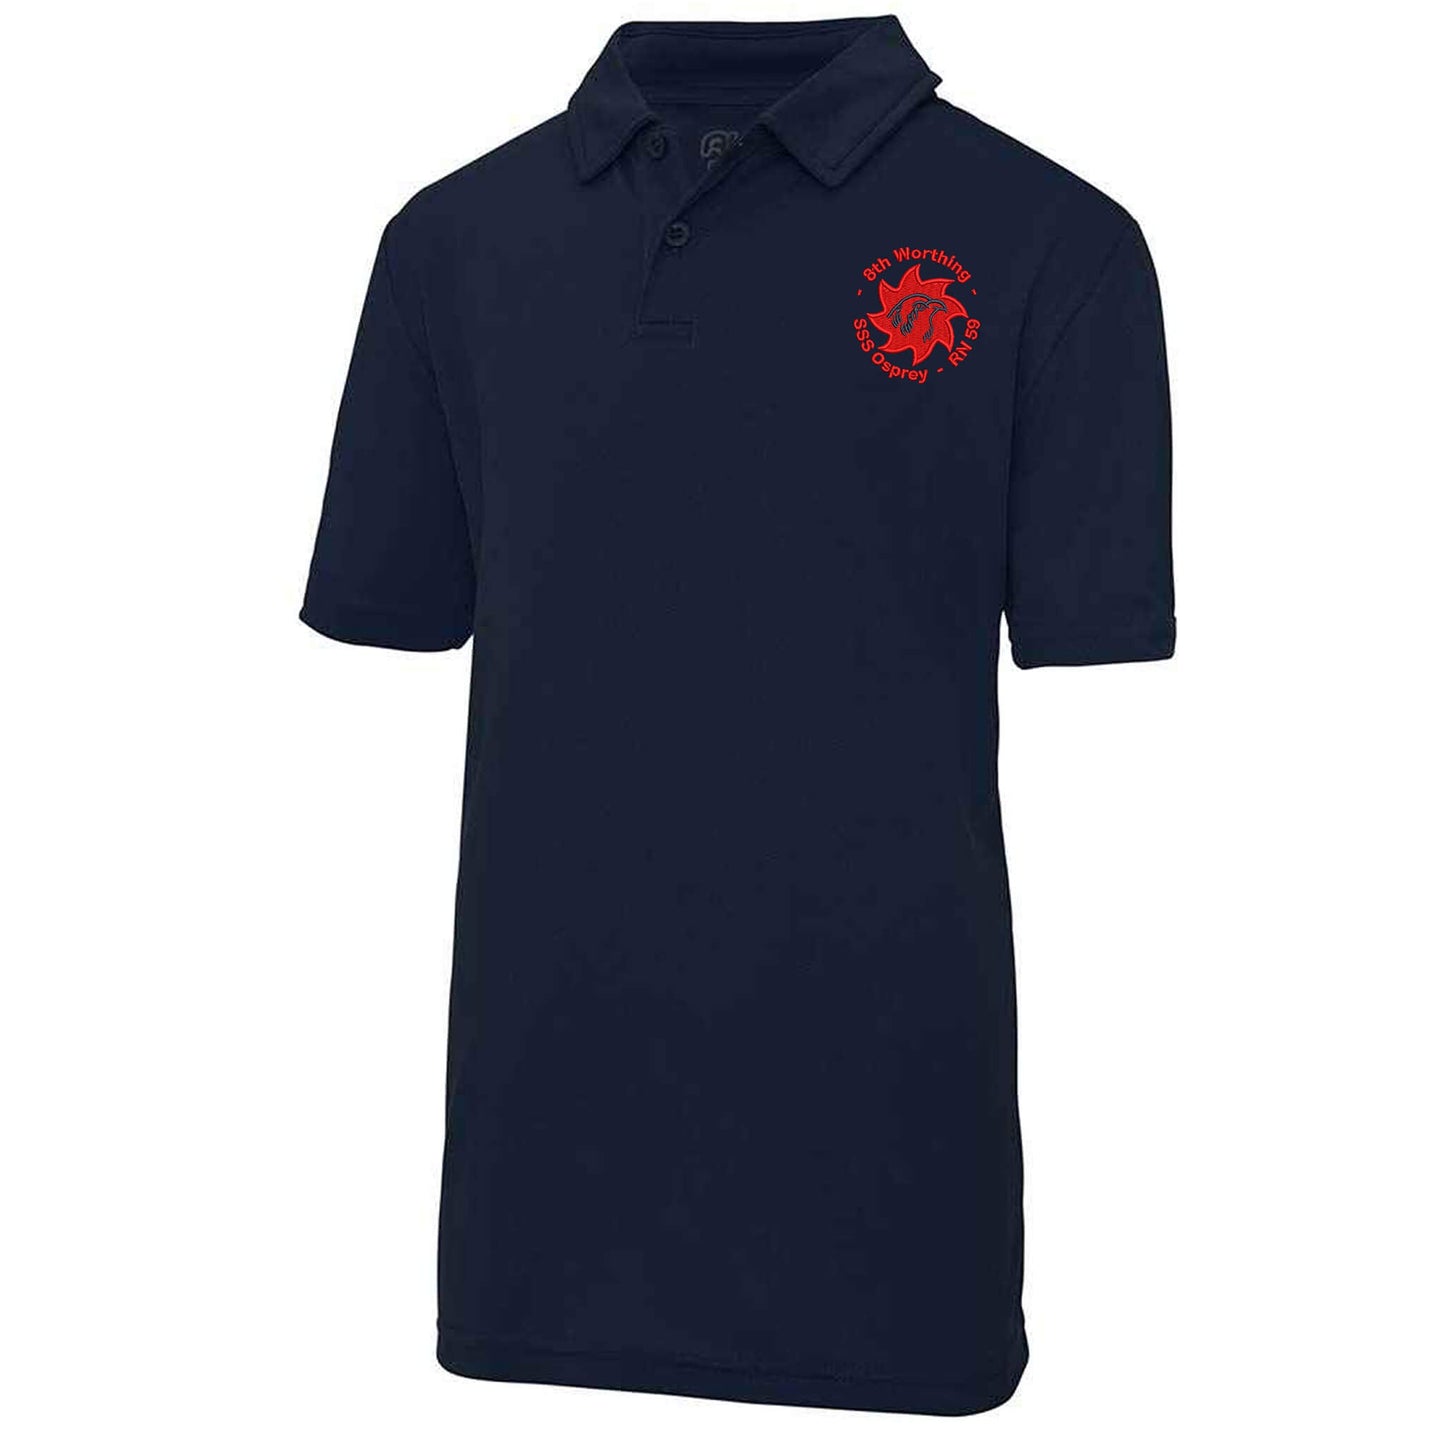 8th WORTHING SEA SCOUTS ADULTS EMBROIDERED POLO SHIRT - Flamingo Rock®